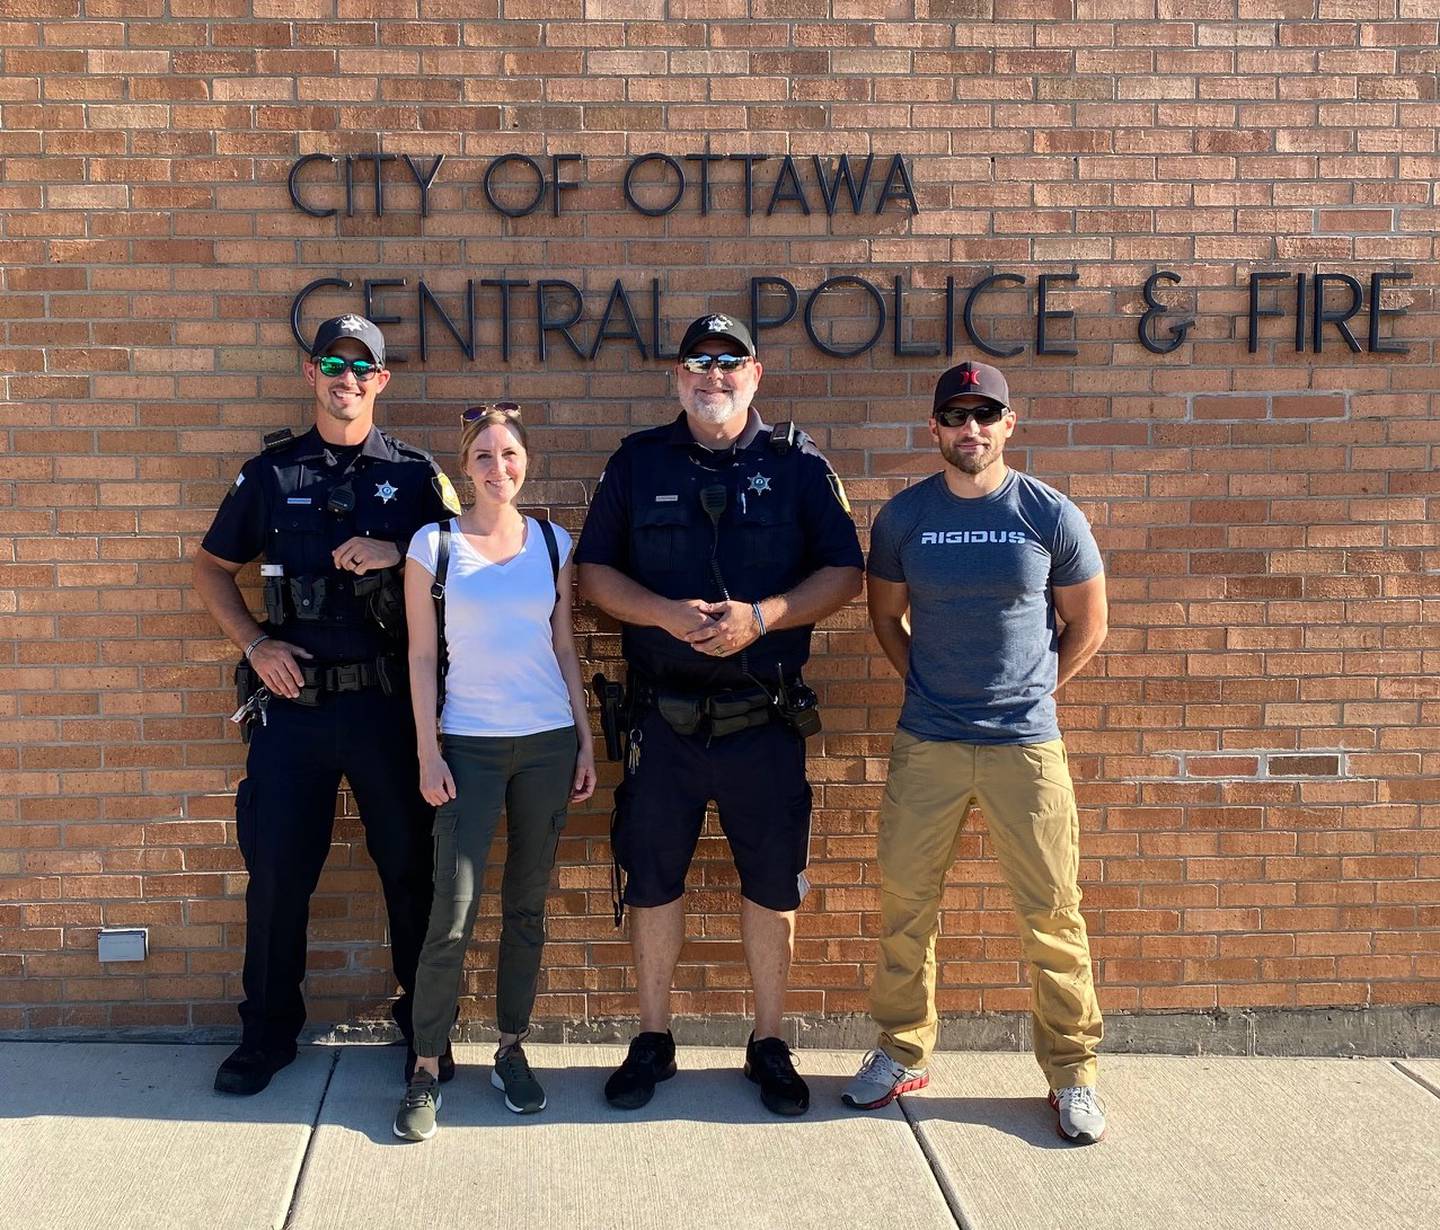 Ottawa officers Matt Najdanovich and Steve Hopkins were accompanied by Elisabeth Dengler and Heinz Petternel, who work for the Landespolizeidirektion (state police) in Vienna, Austria, during a visit to the area.